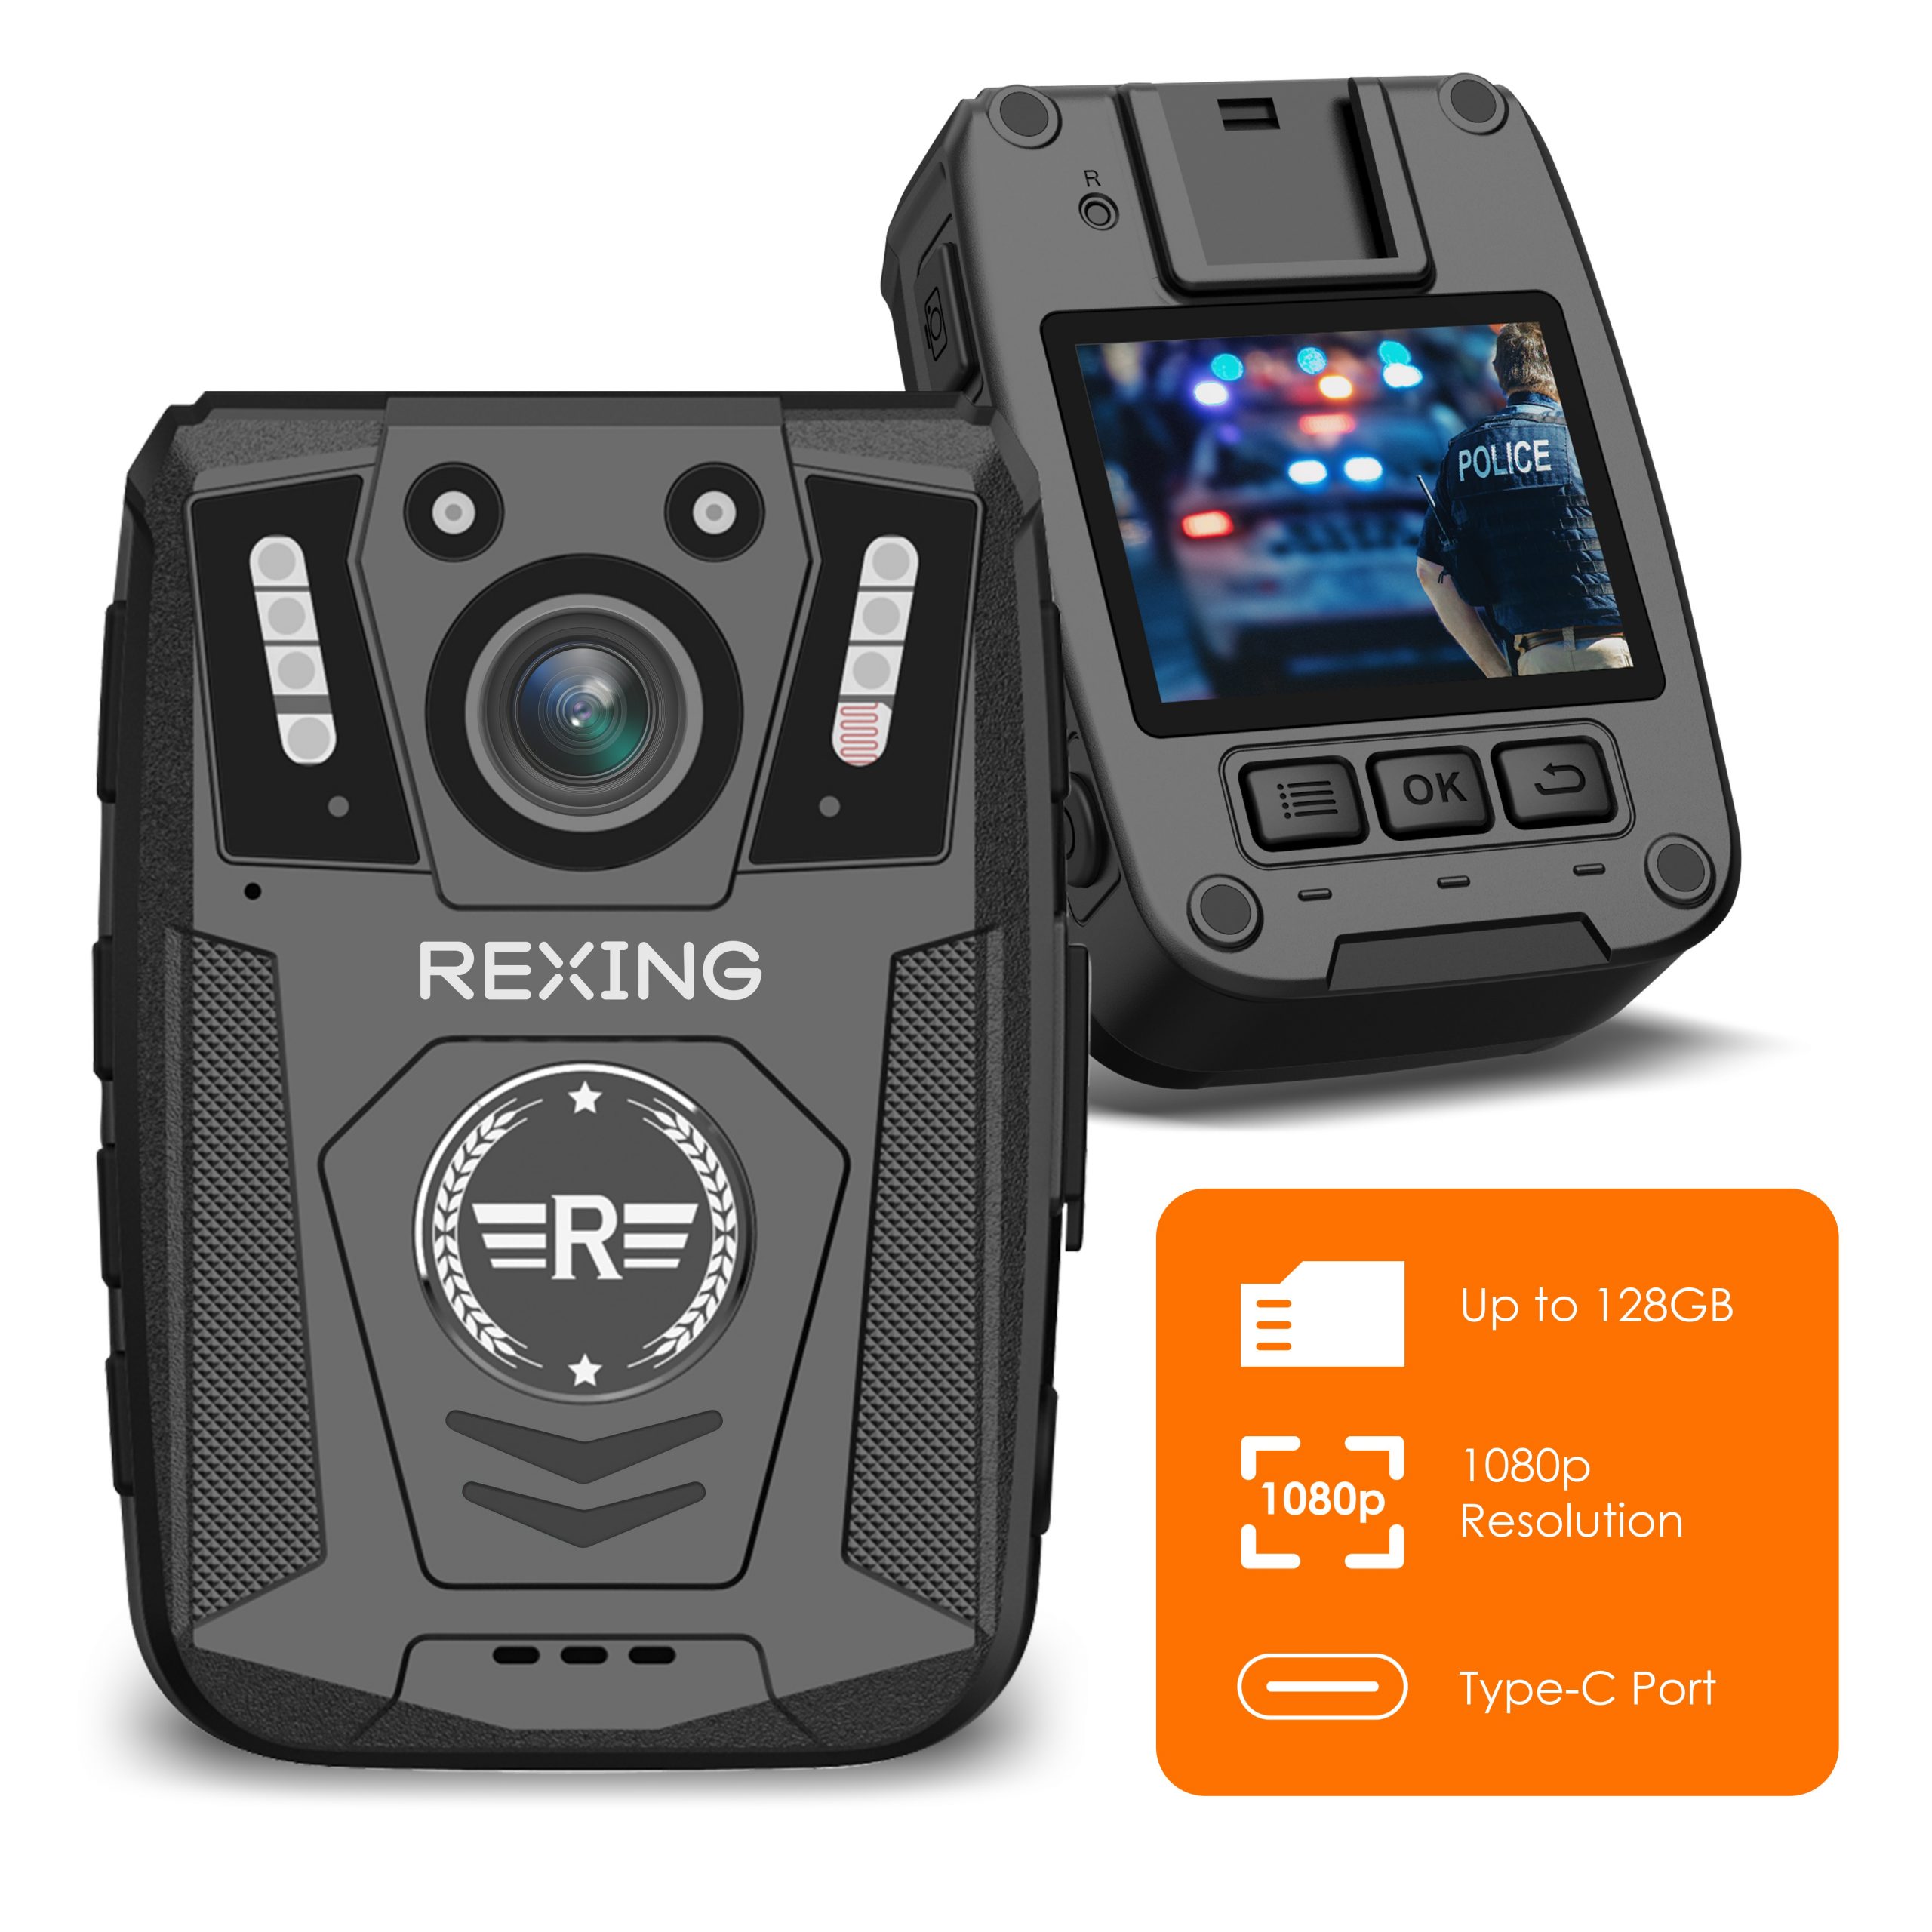 Rexing P2 FHD Body Camera 1080p Full HD With Type-C Port